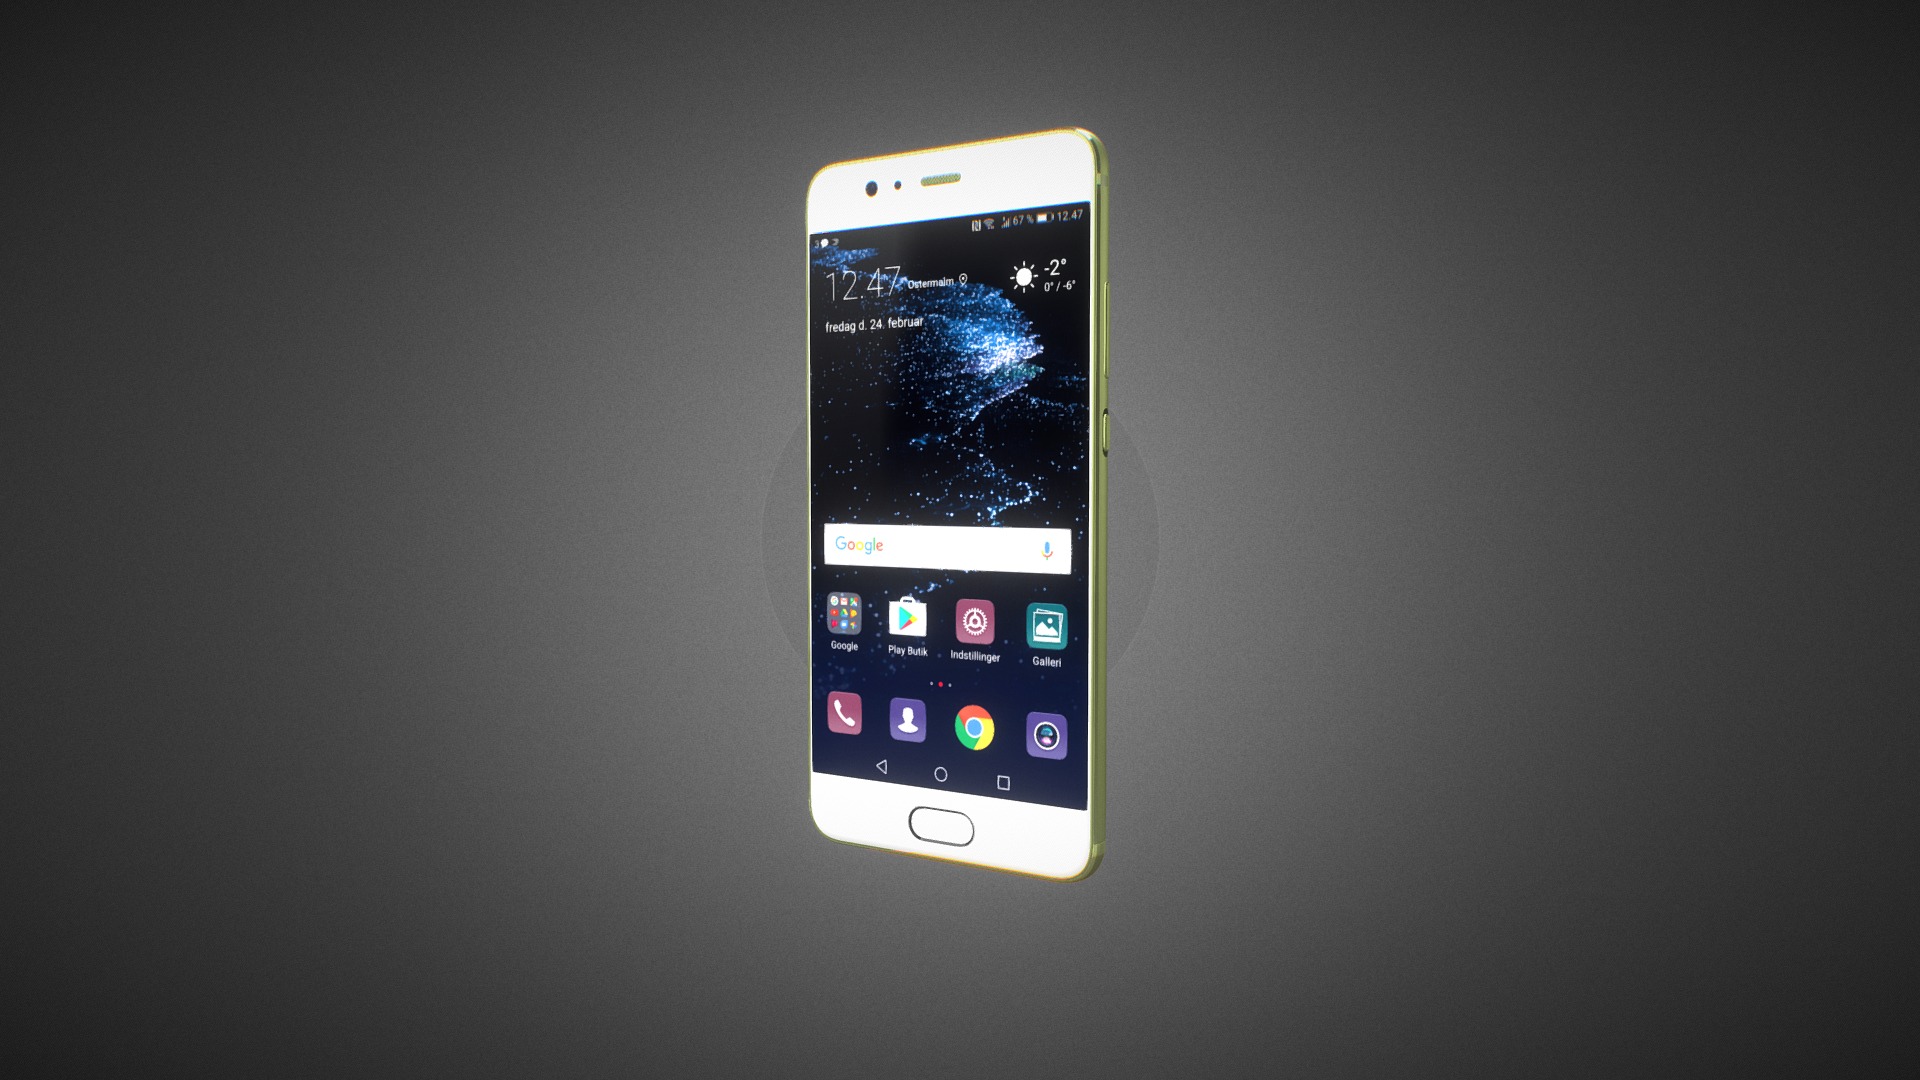 3D model Huawei P10 for Element 3D - This is a 3D model of the Huawei P10 for Element 3D. The 3D model is about a cell phone with a blue screen.